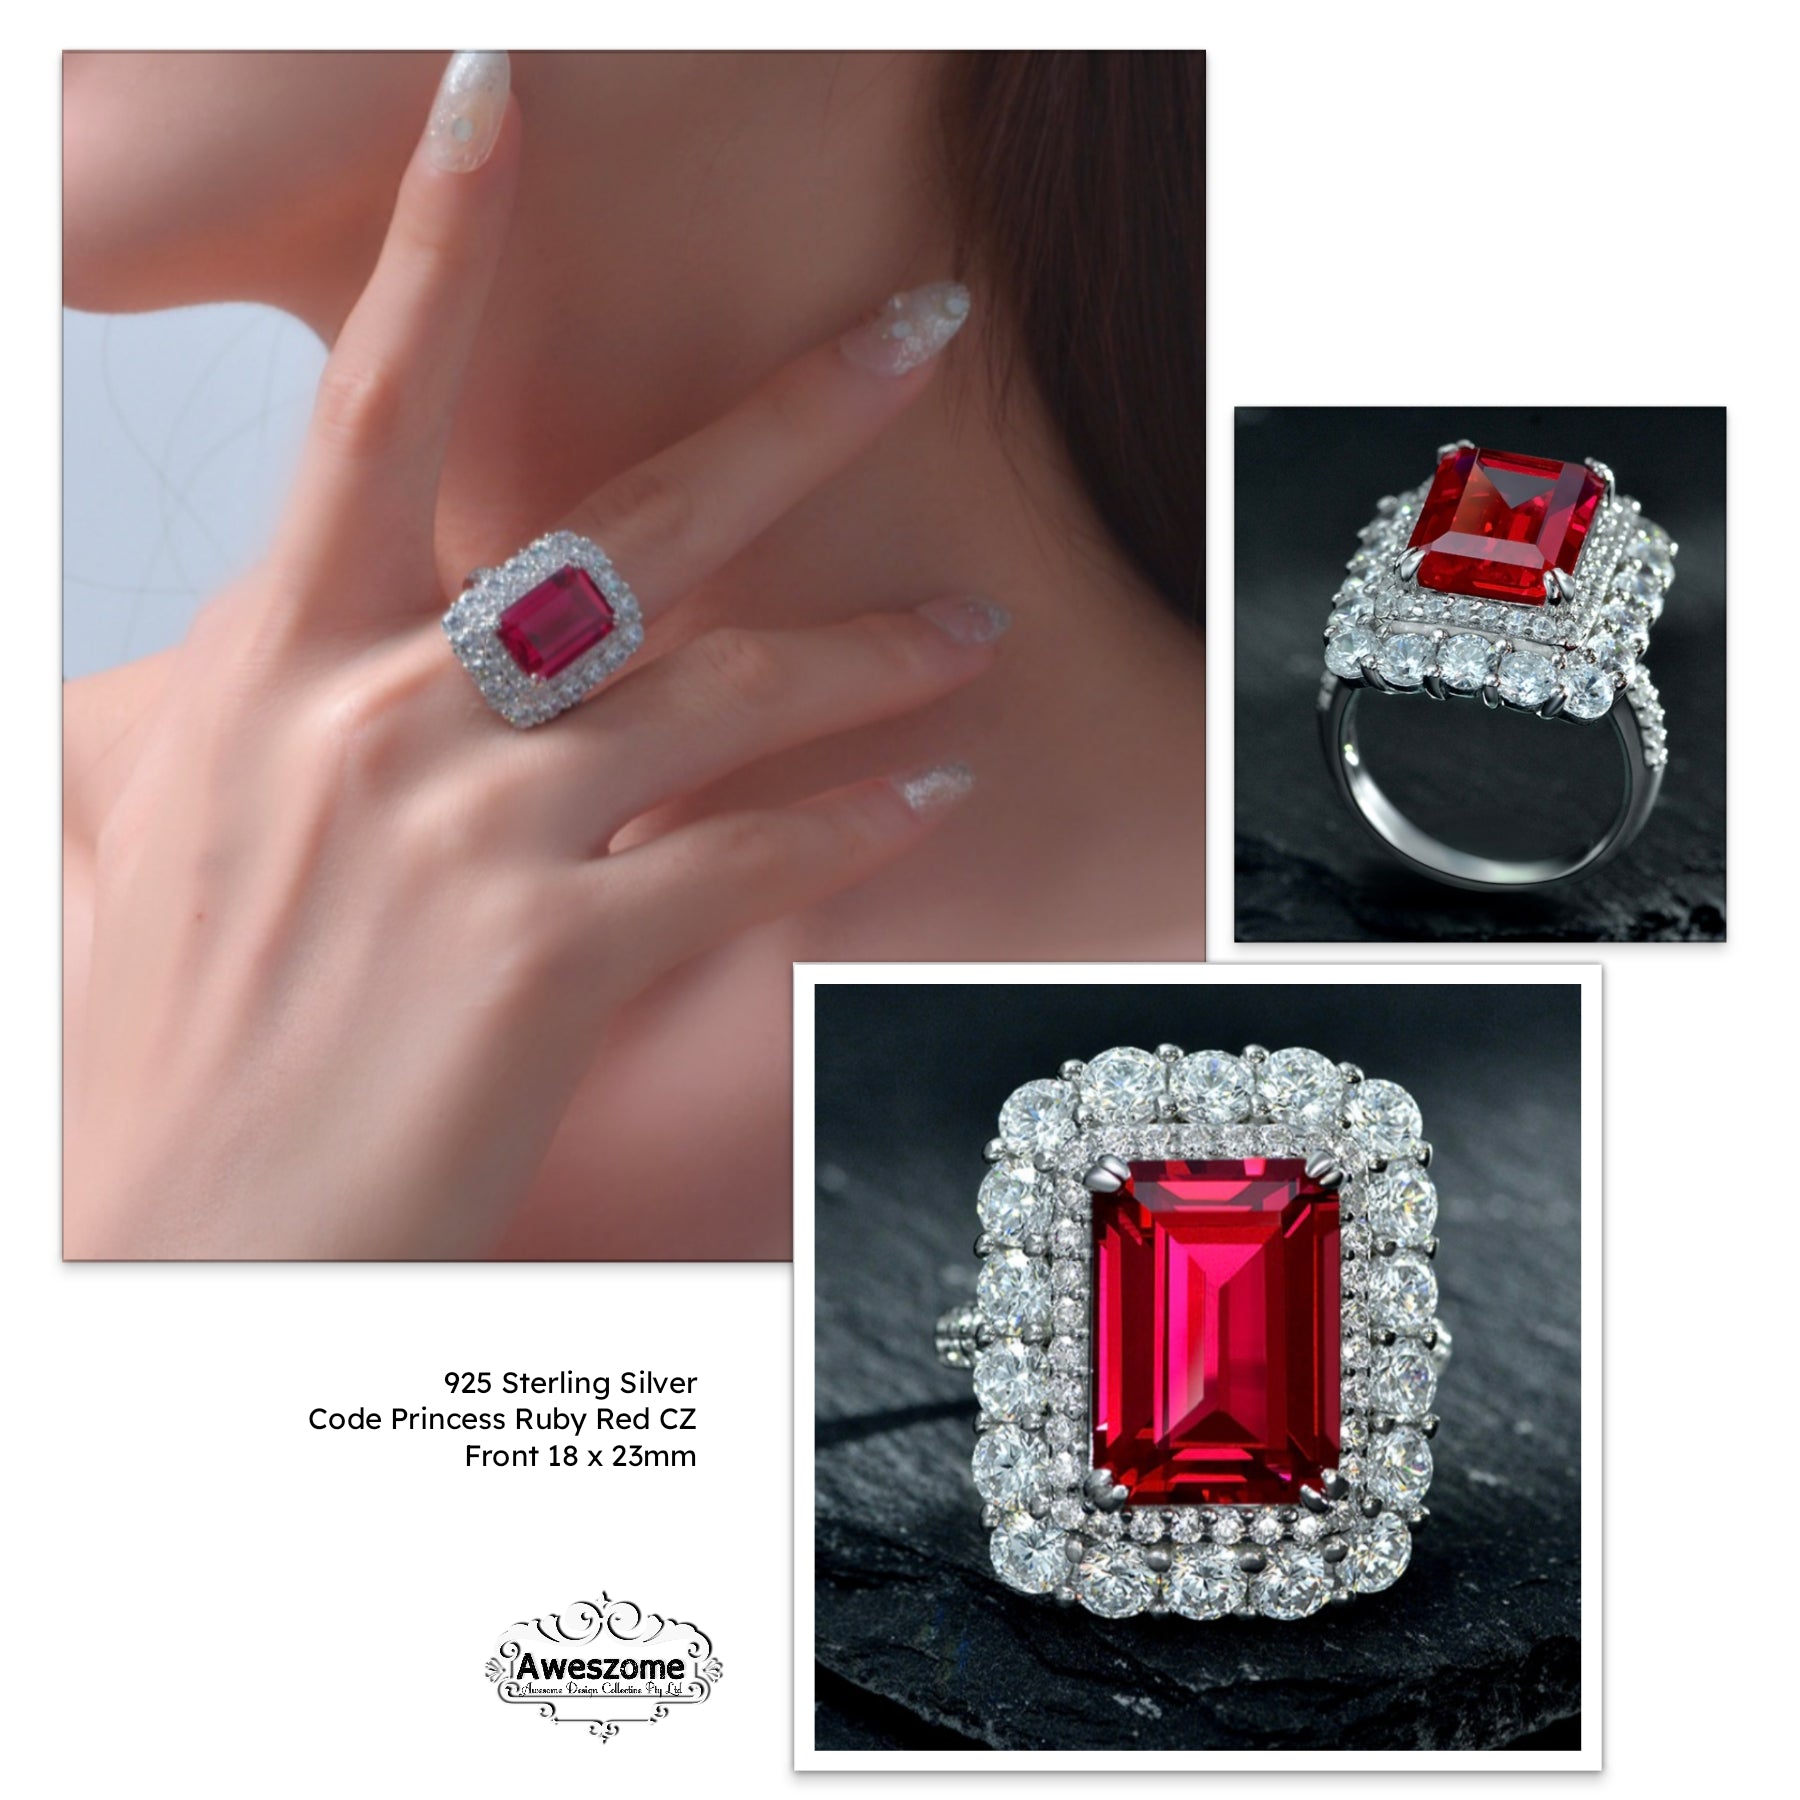 Silver Ring Princess Ruby Red